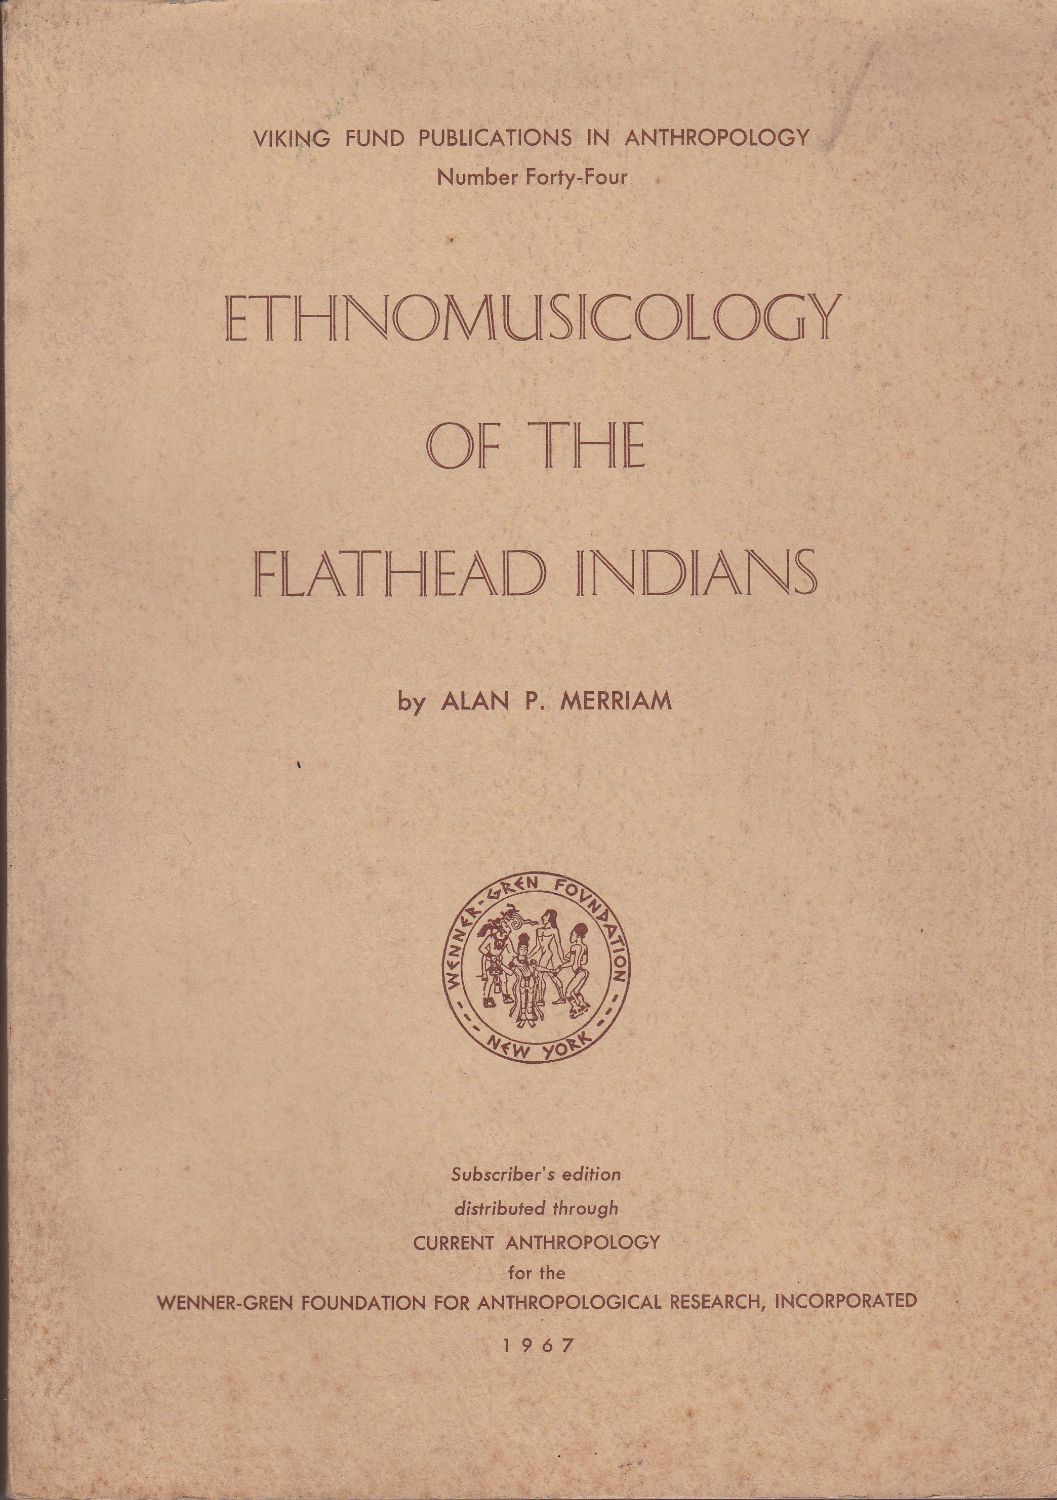 Ethnomusicology of the Flathead Indians.　(Viking Fund publications in anthropology ; no. 44)